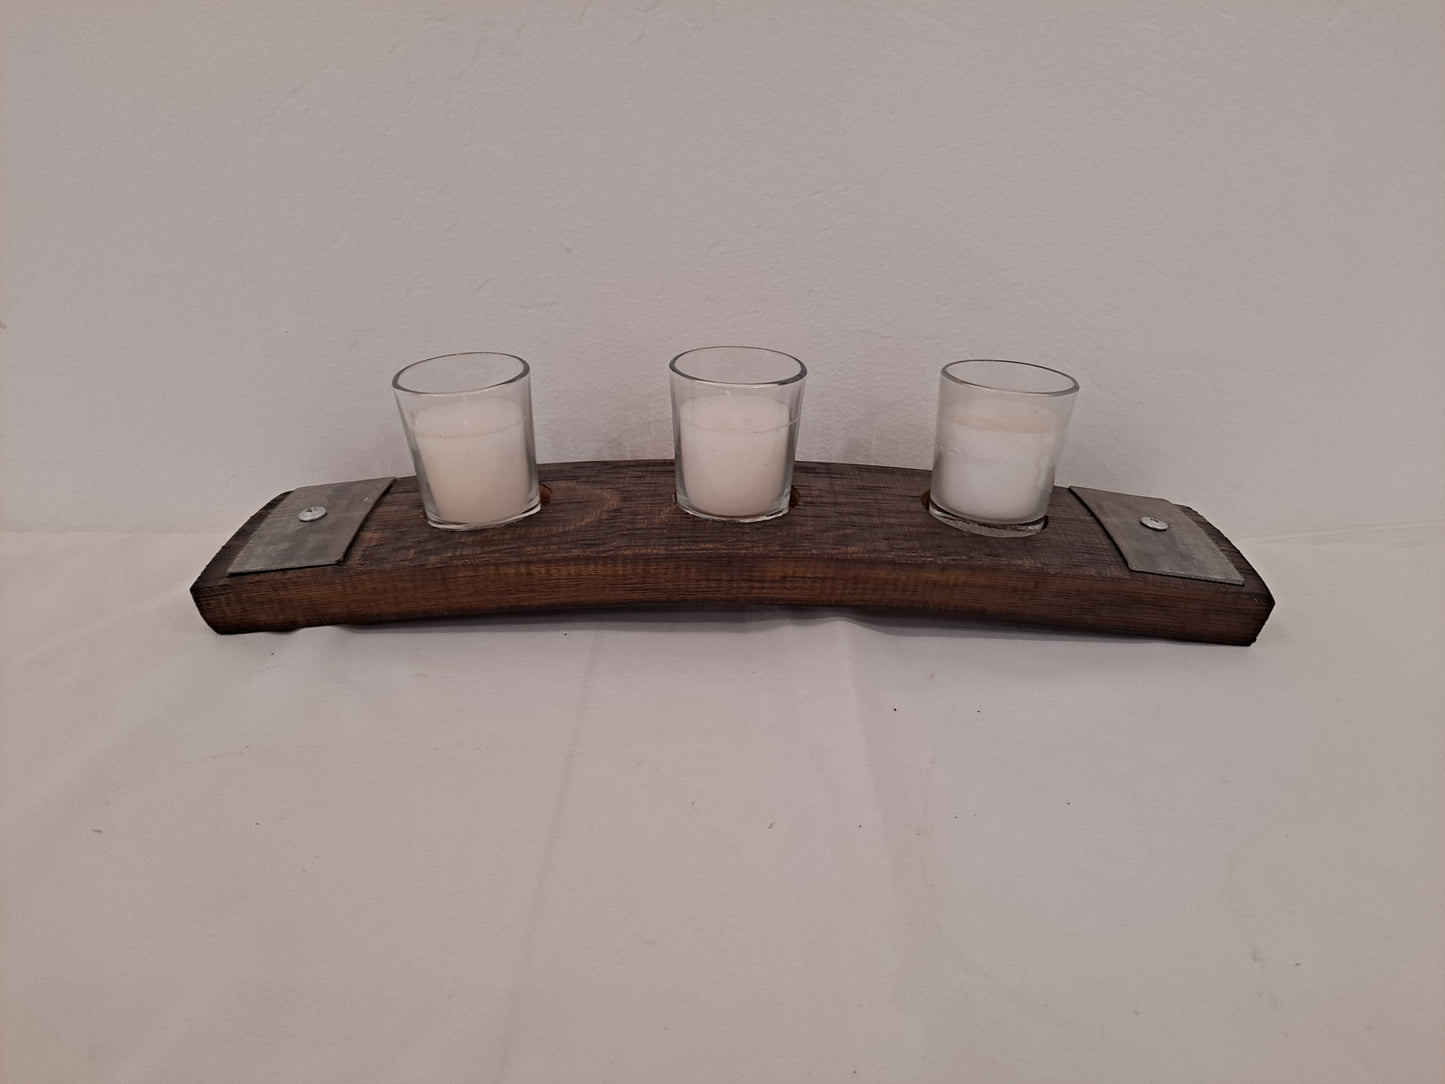 Candle Holders